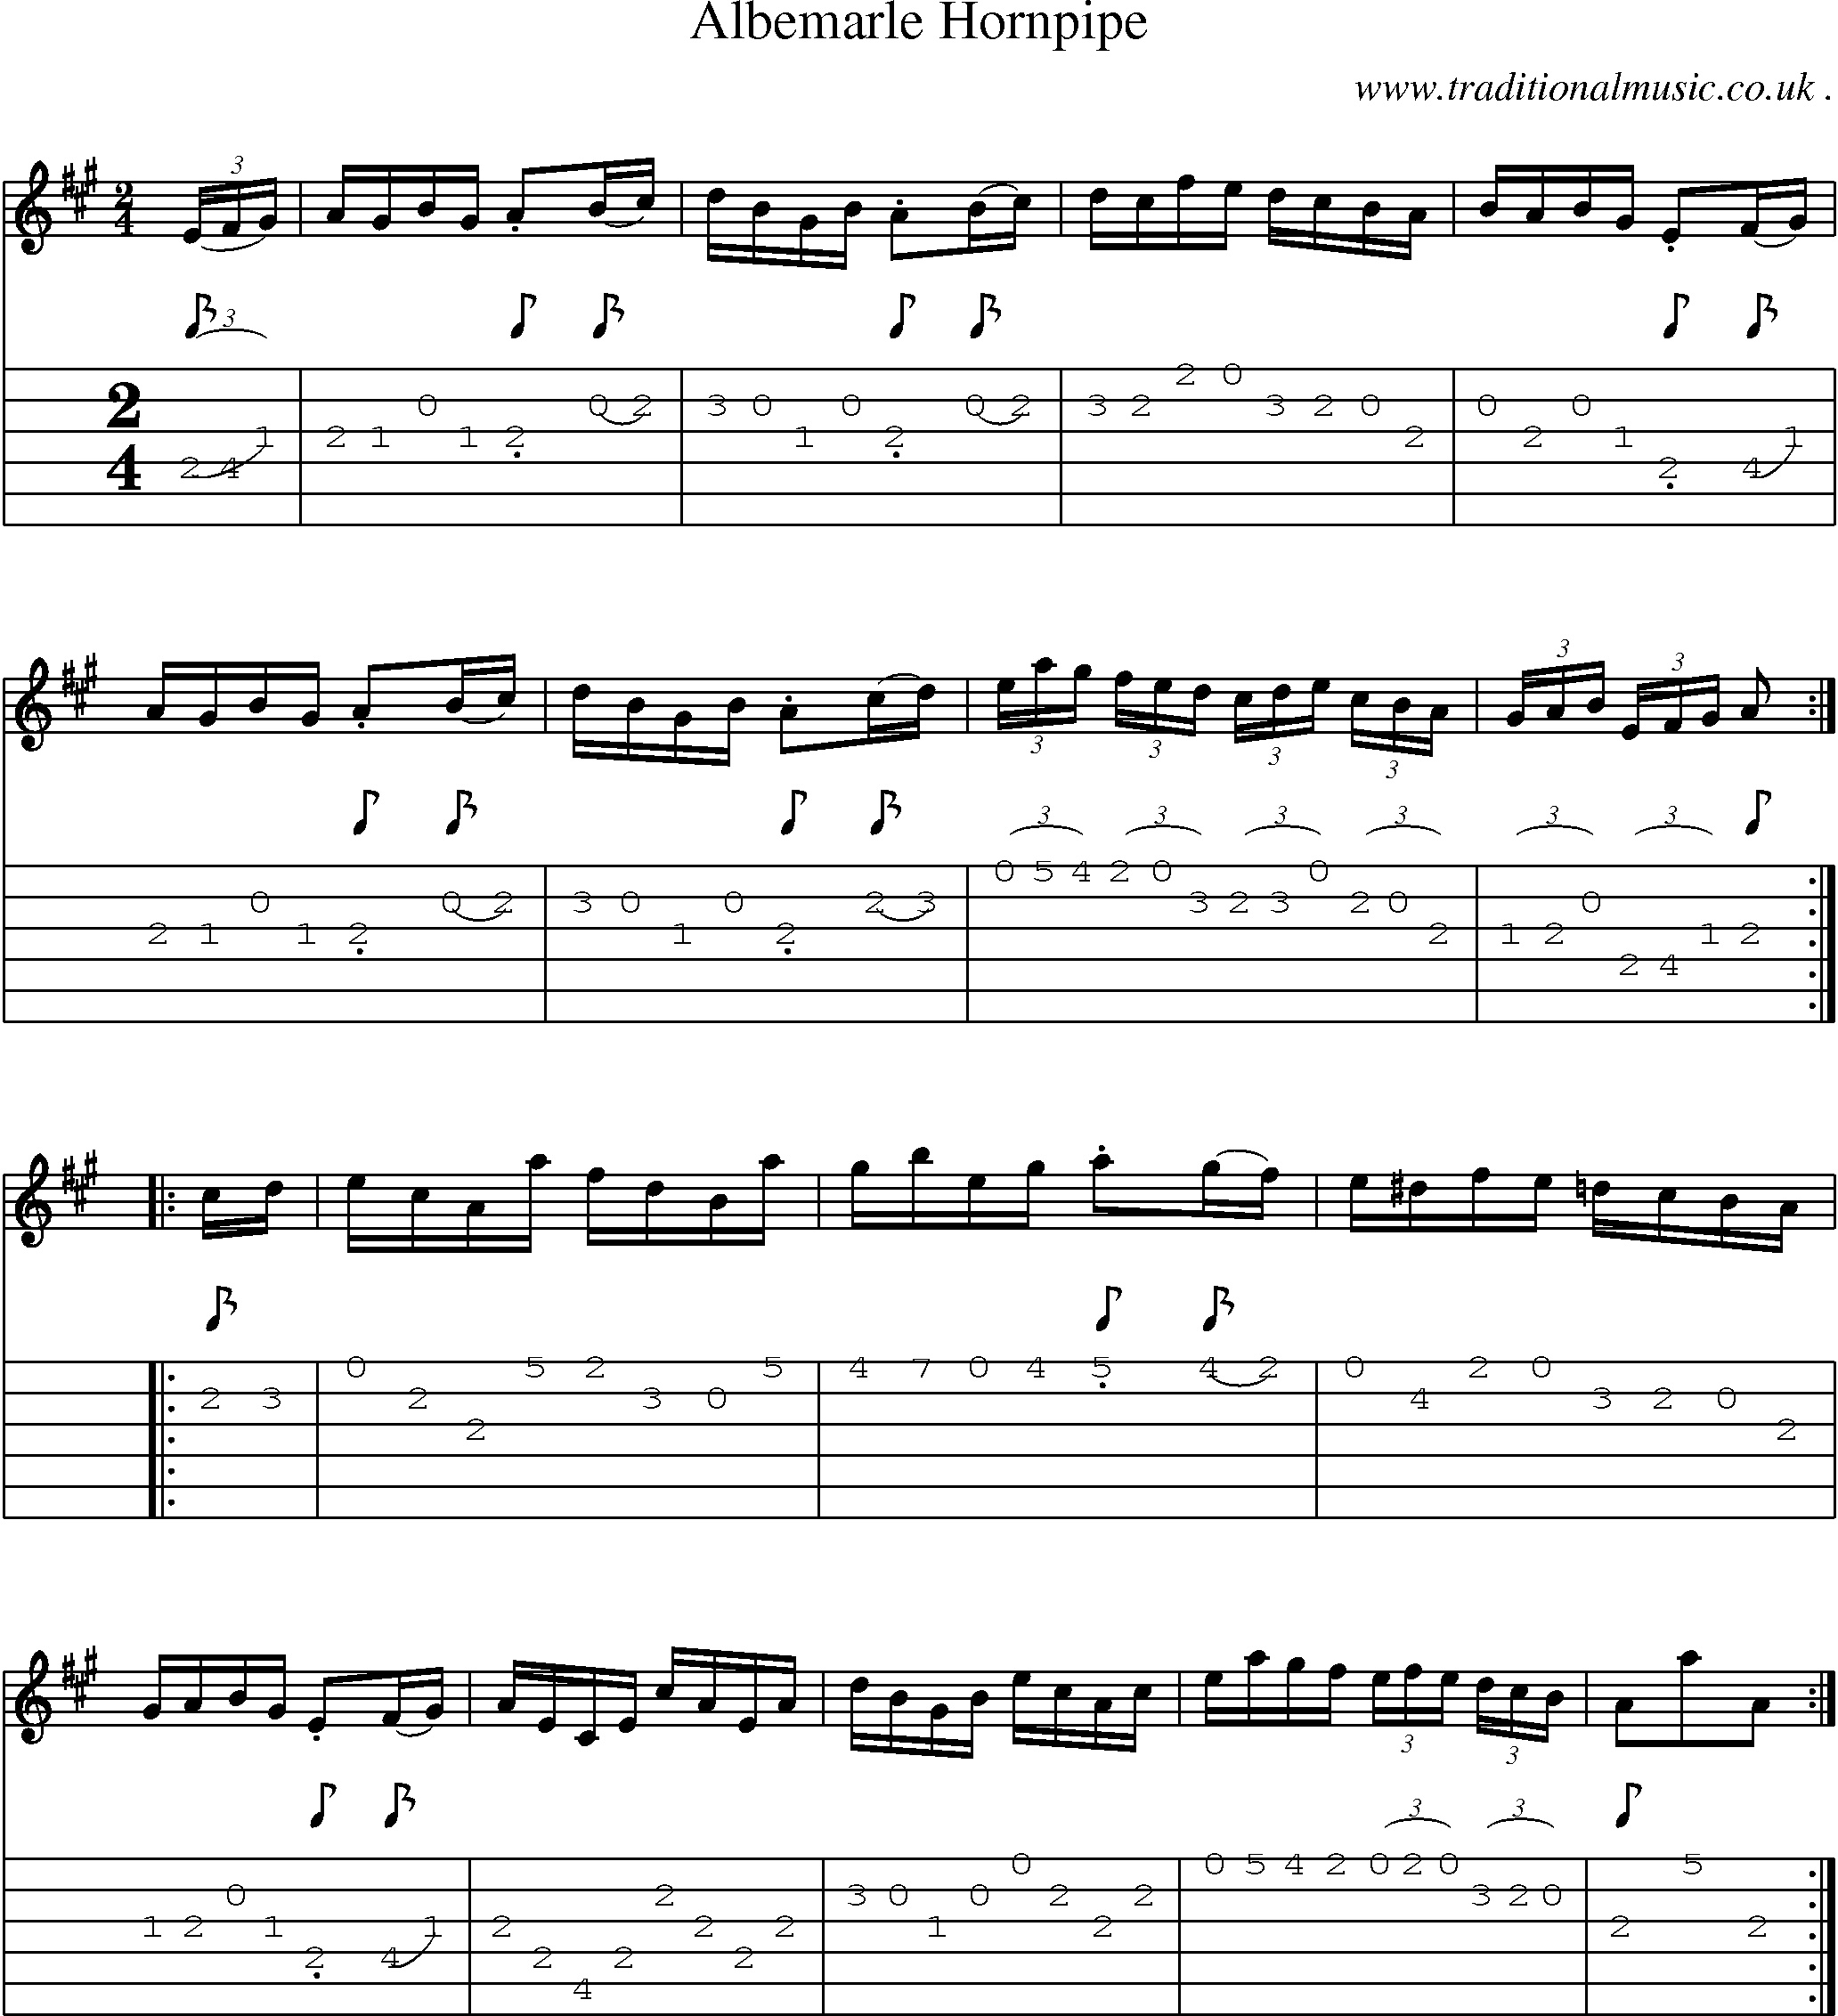 Sheet-Music and Guitar Tabs for Albemarle Hornpipe